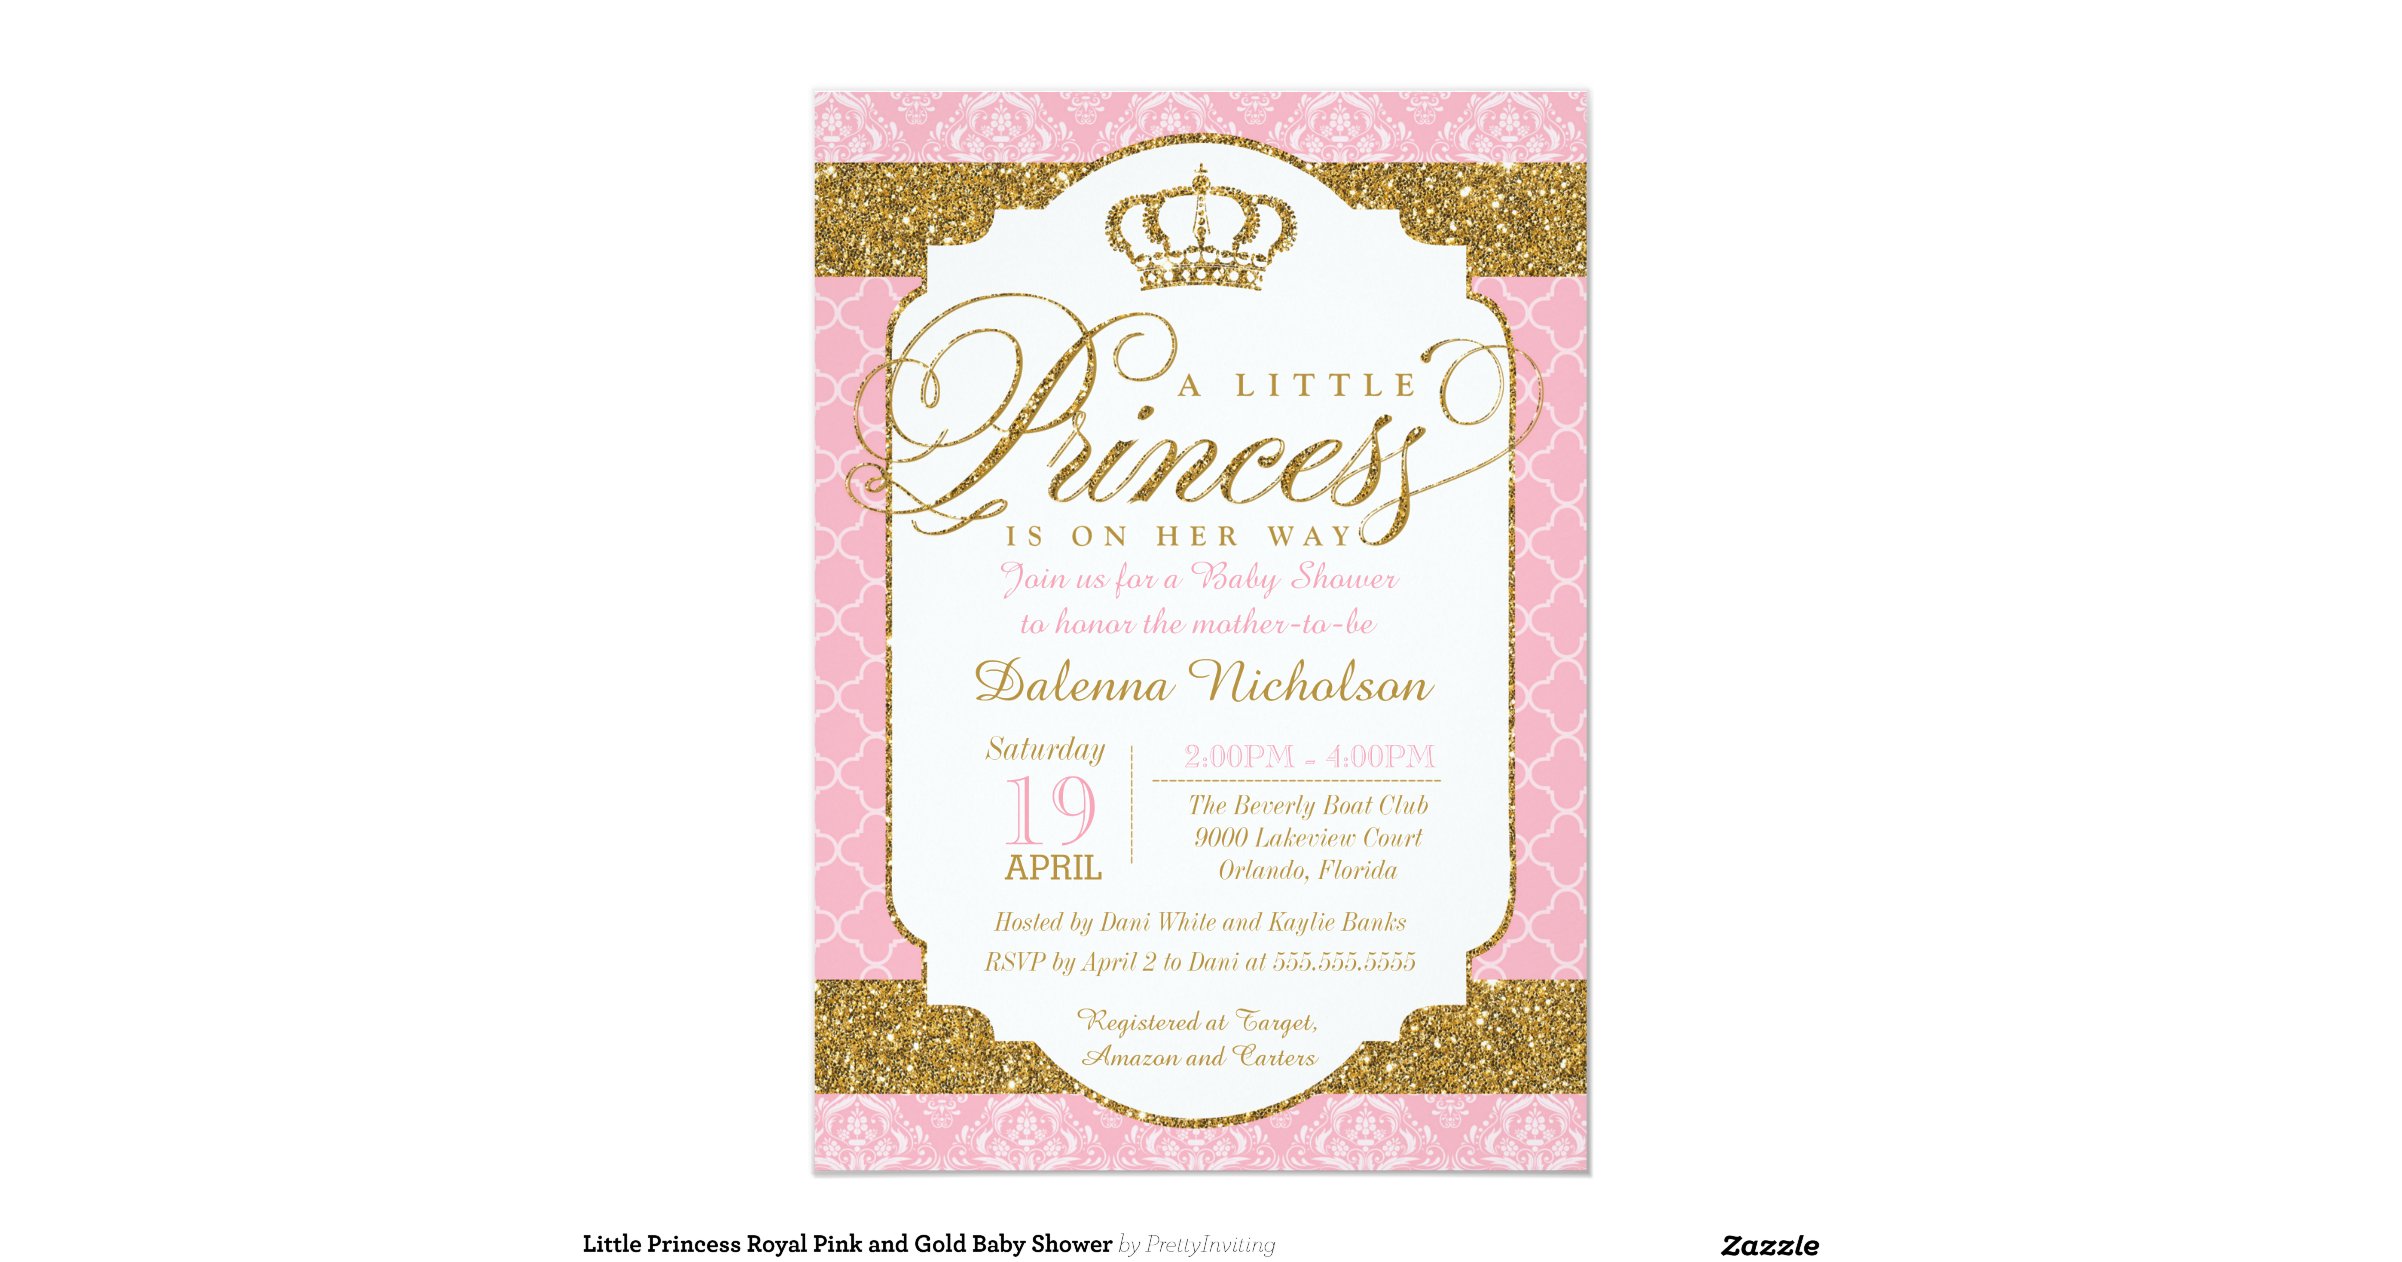 Little Princess Royal Pink and Gold Baby Shower 5x7 Paper Invitation ...